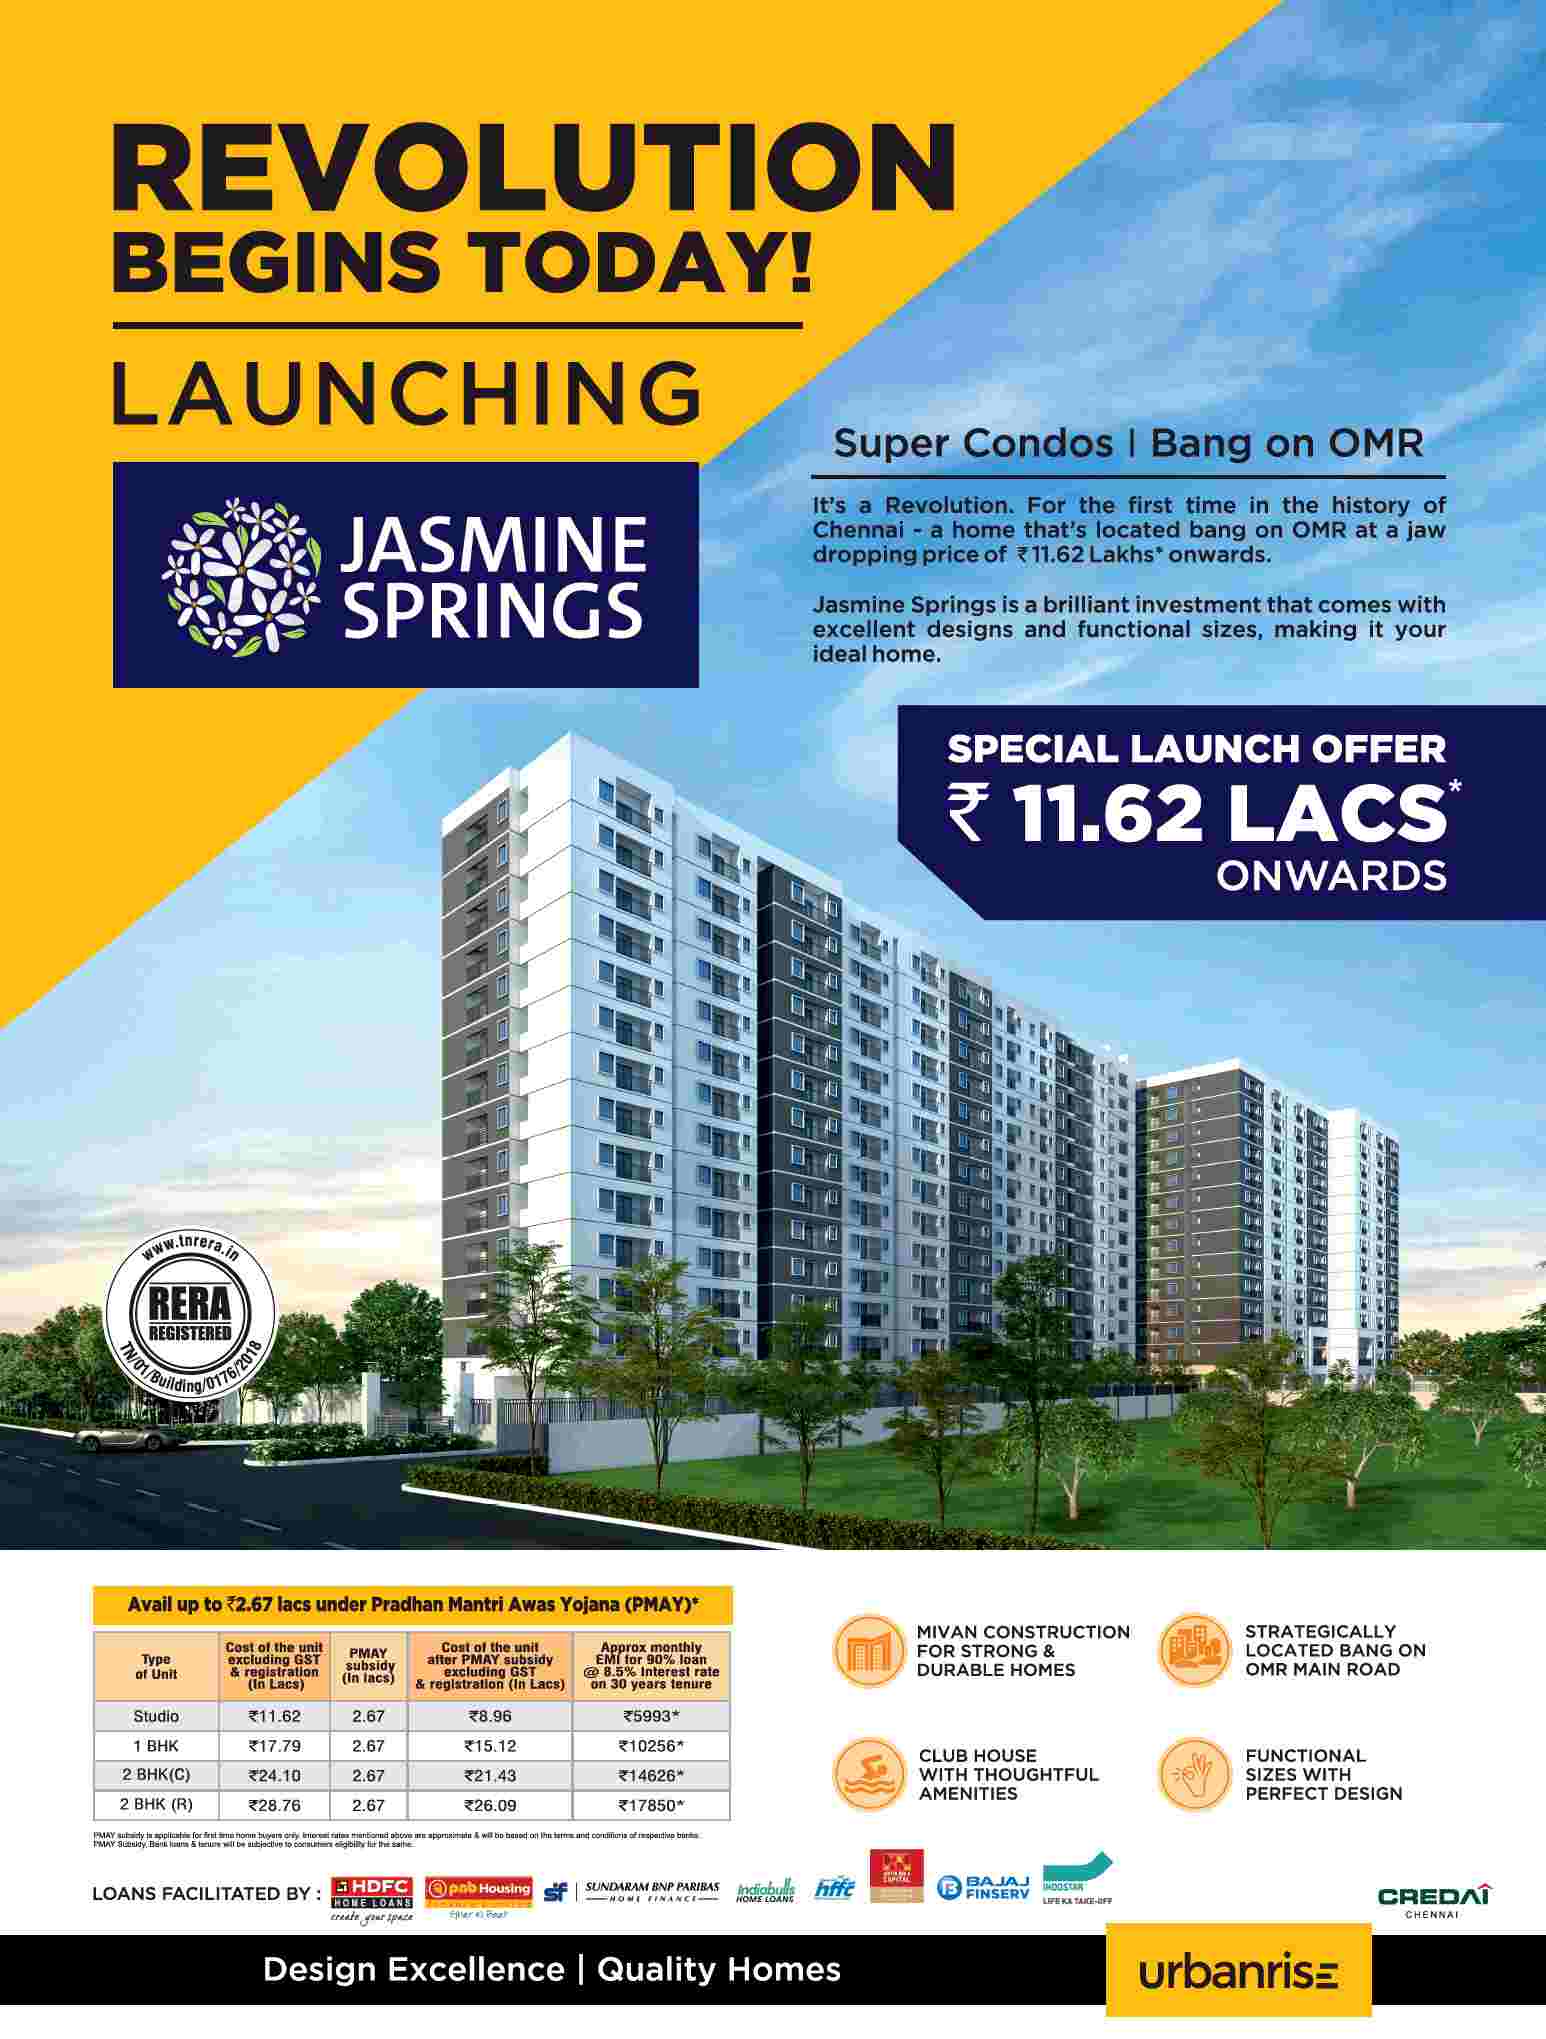 Book your home with special launch offer of Rs. 11.62 Lacs onwards at Alliance Jasmine Springs in Chennai Update